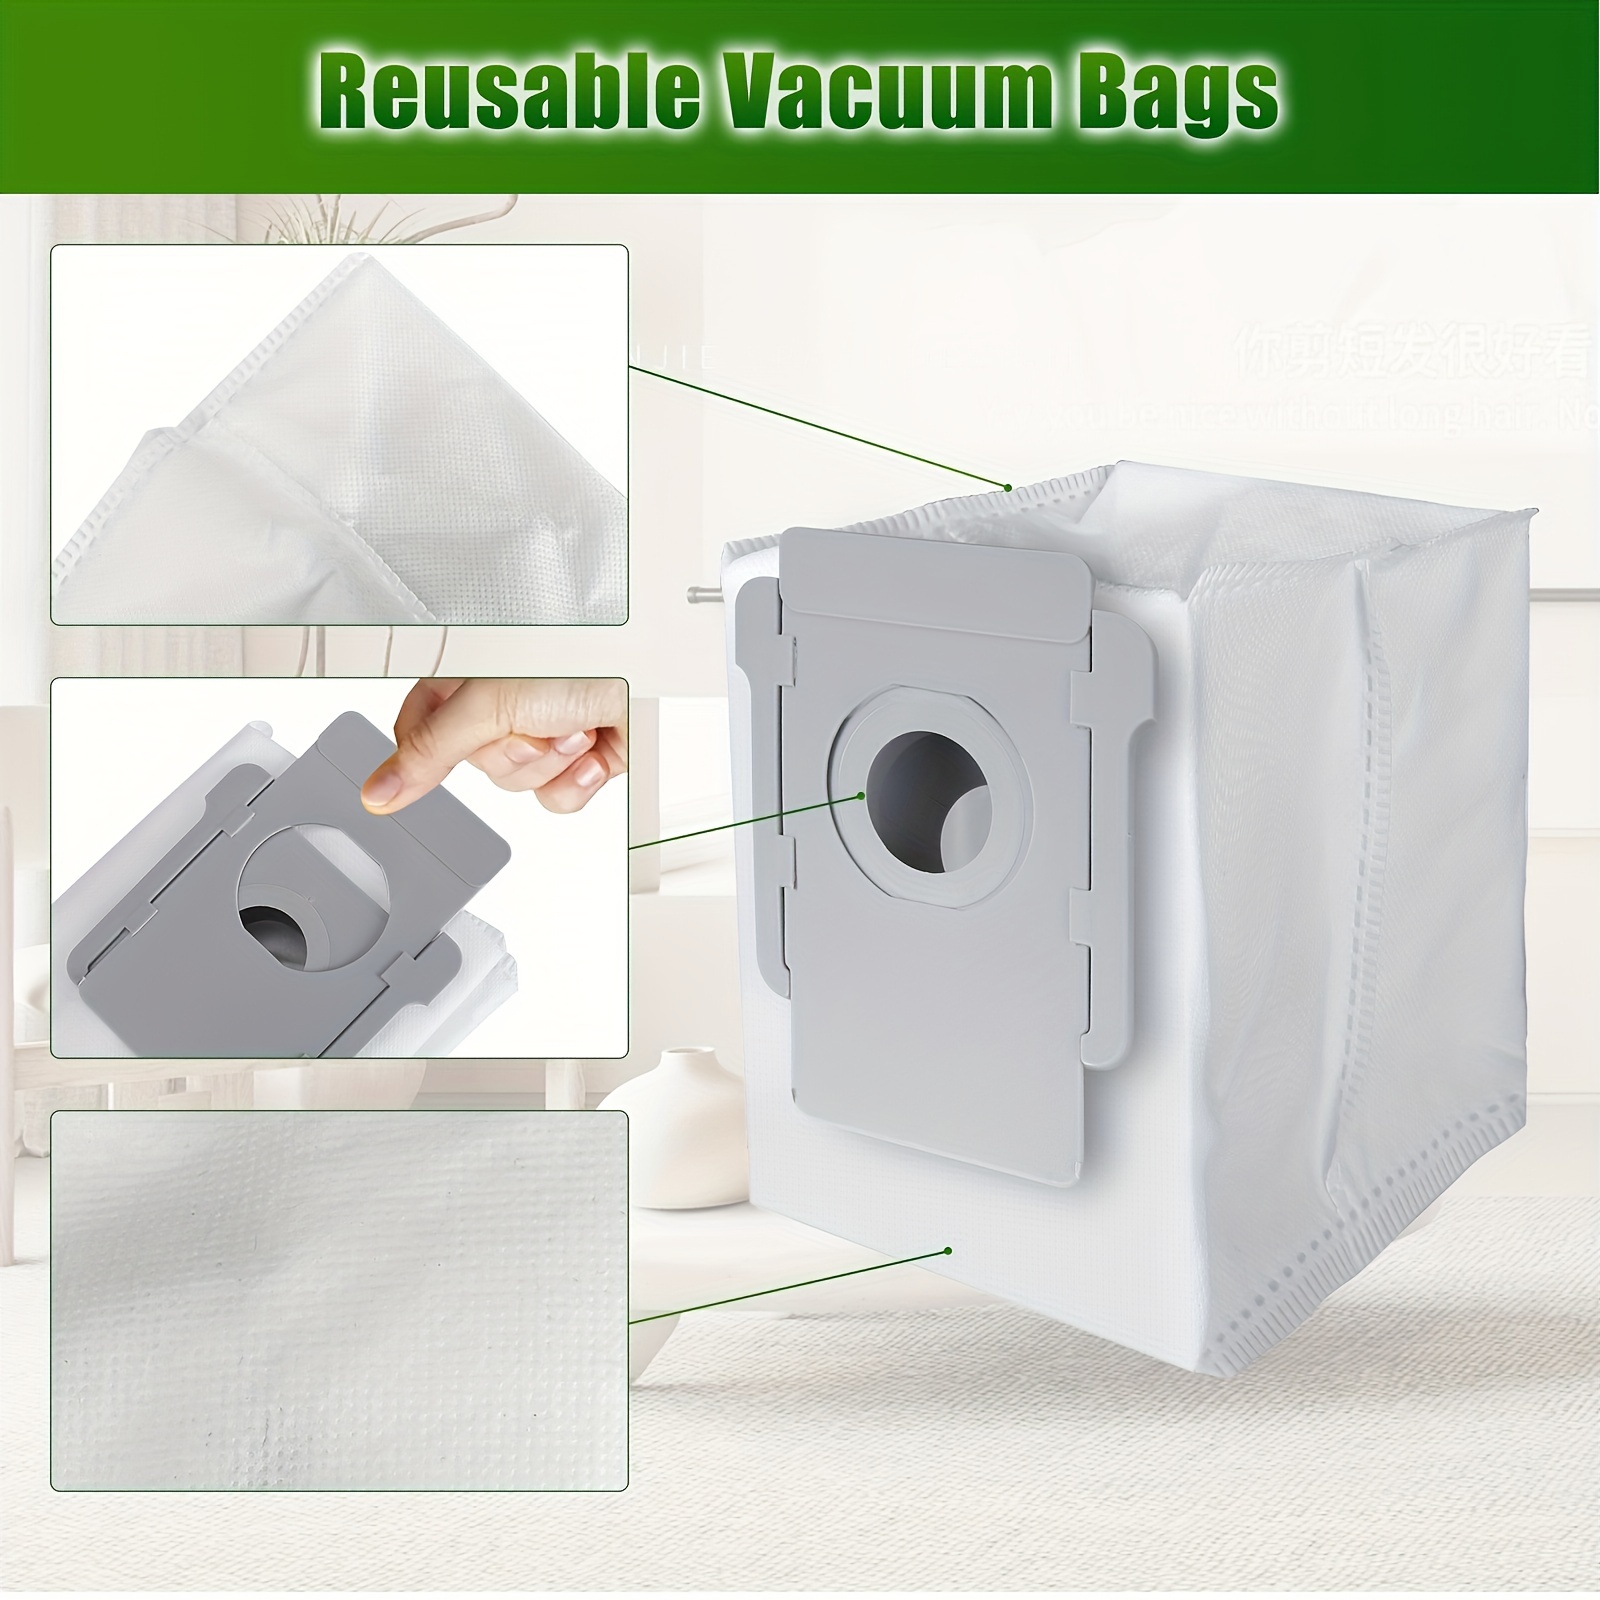 RoboVac 6-Pack Dust Bags Accessory Kit